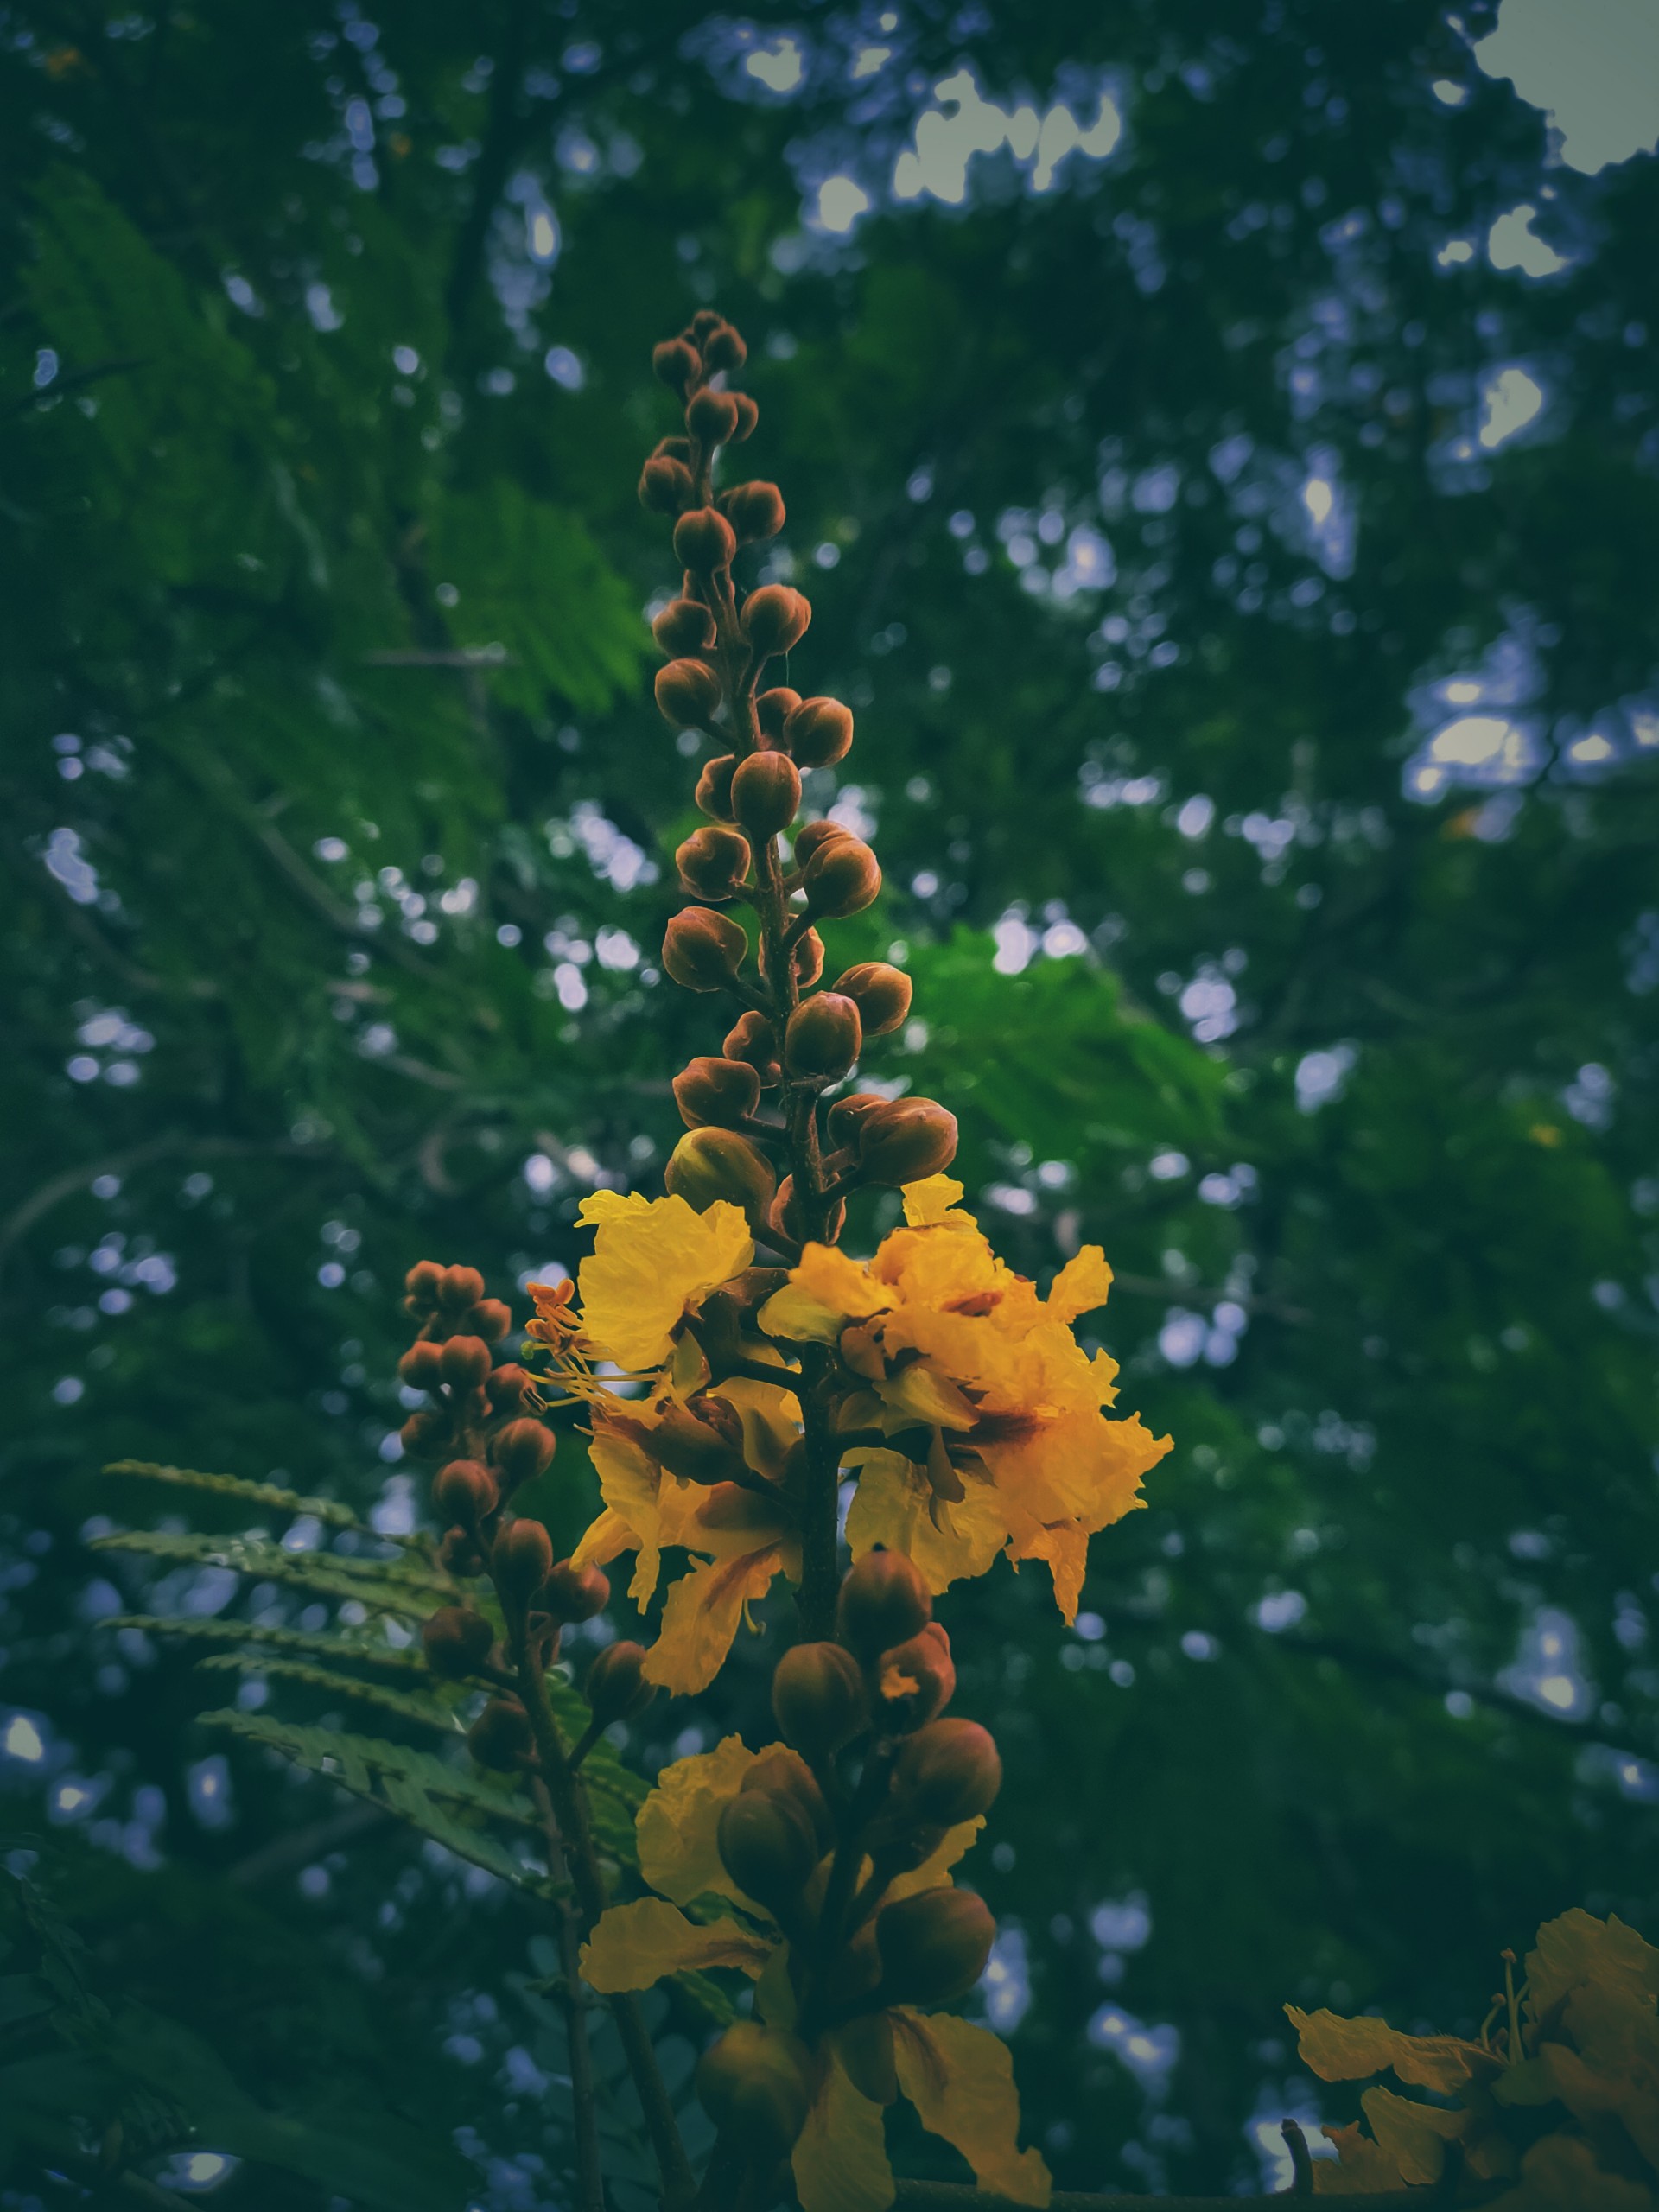 Yellow flowers on a plant